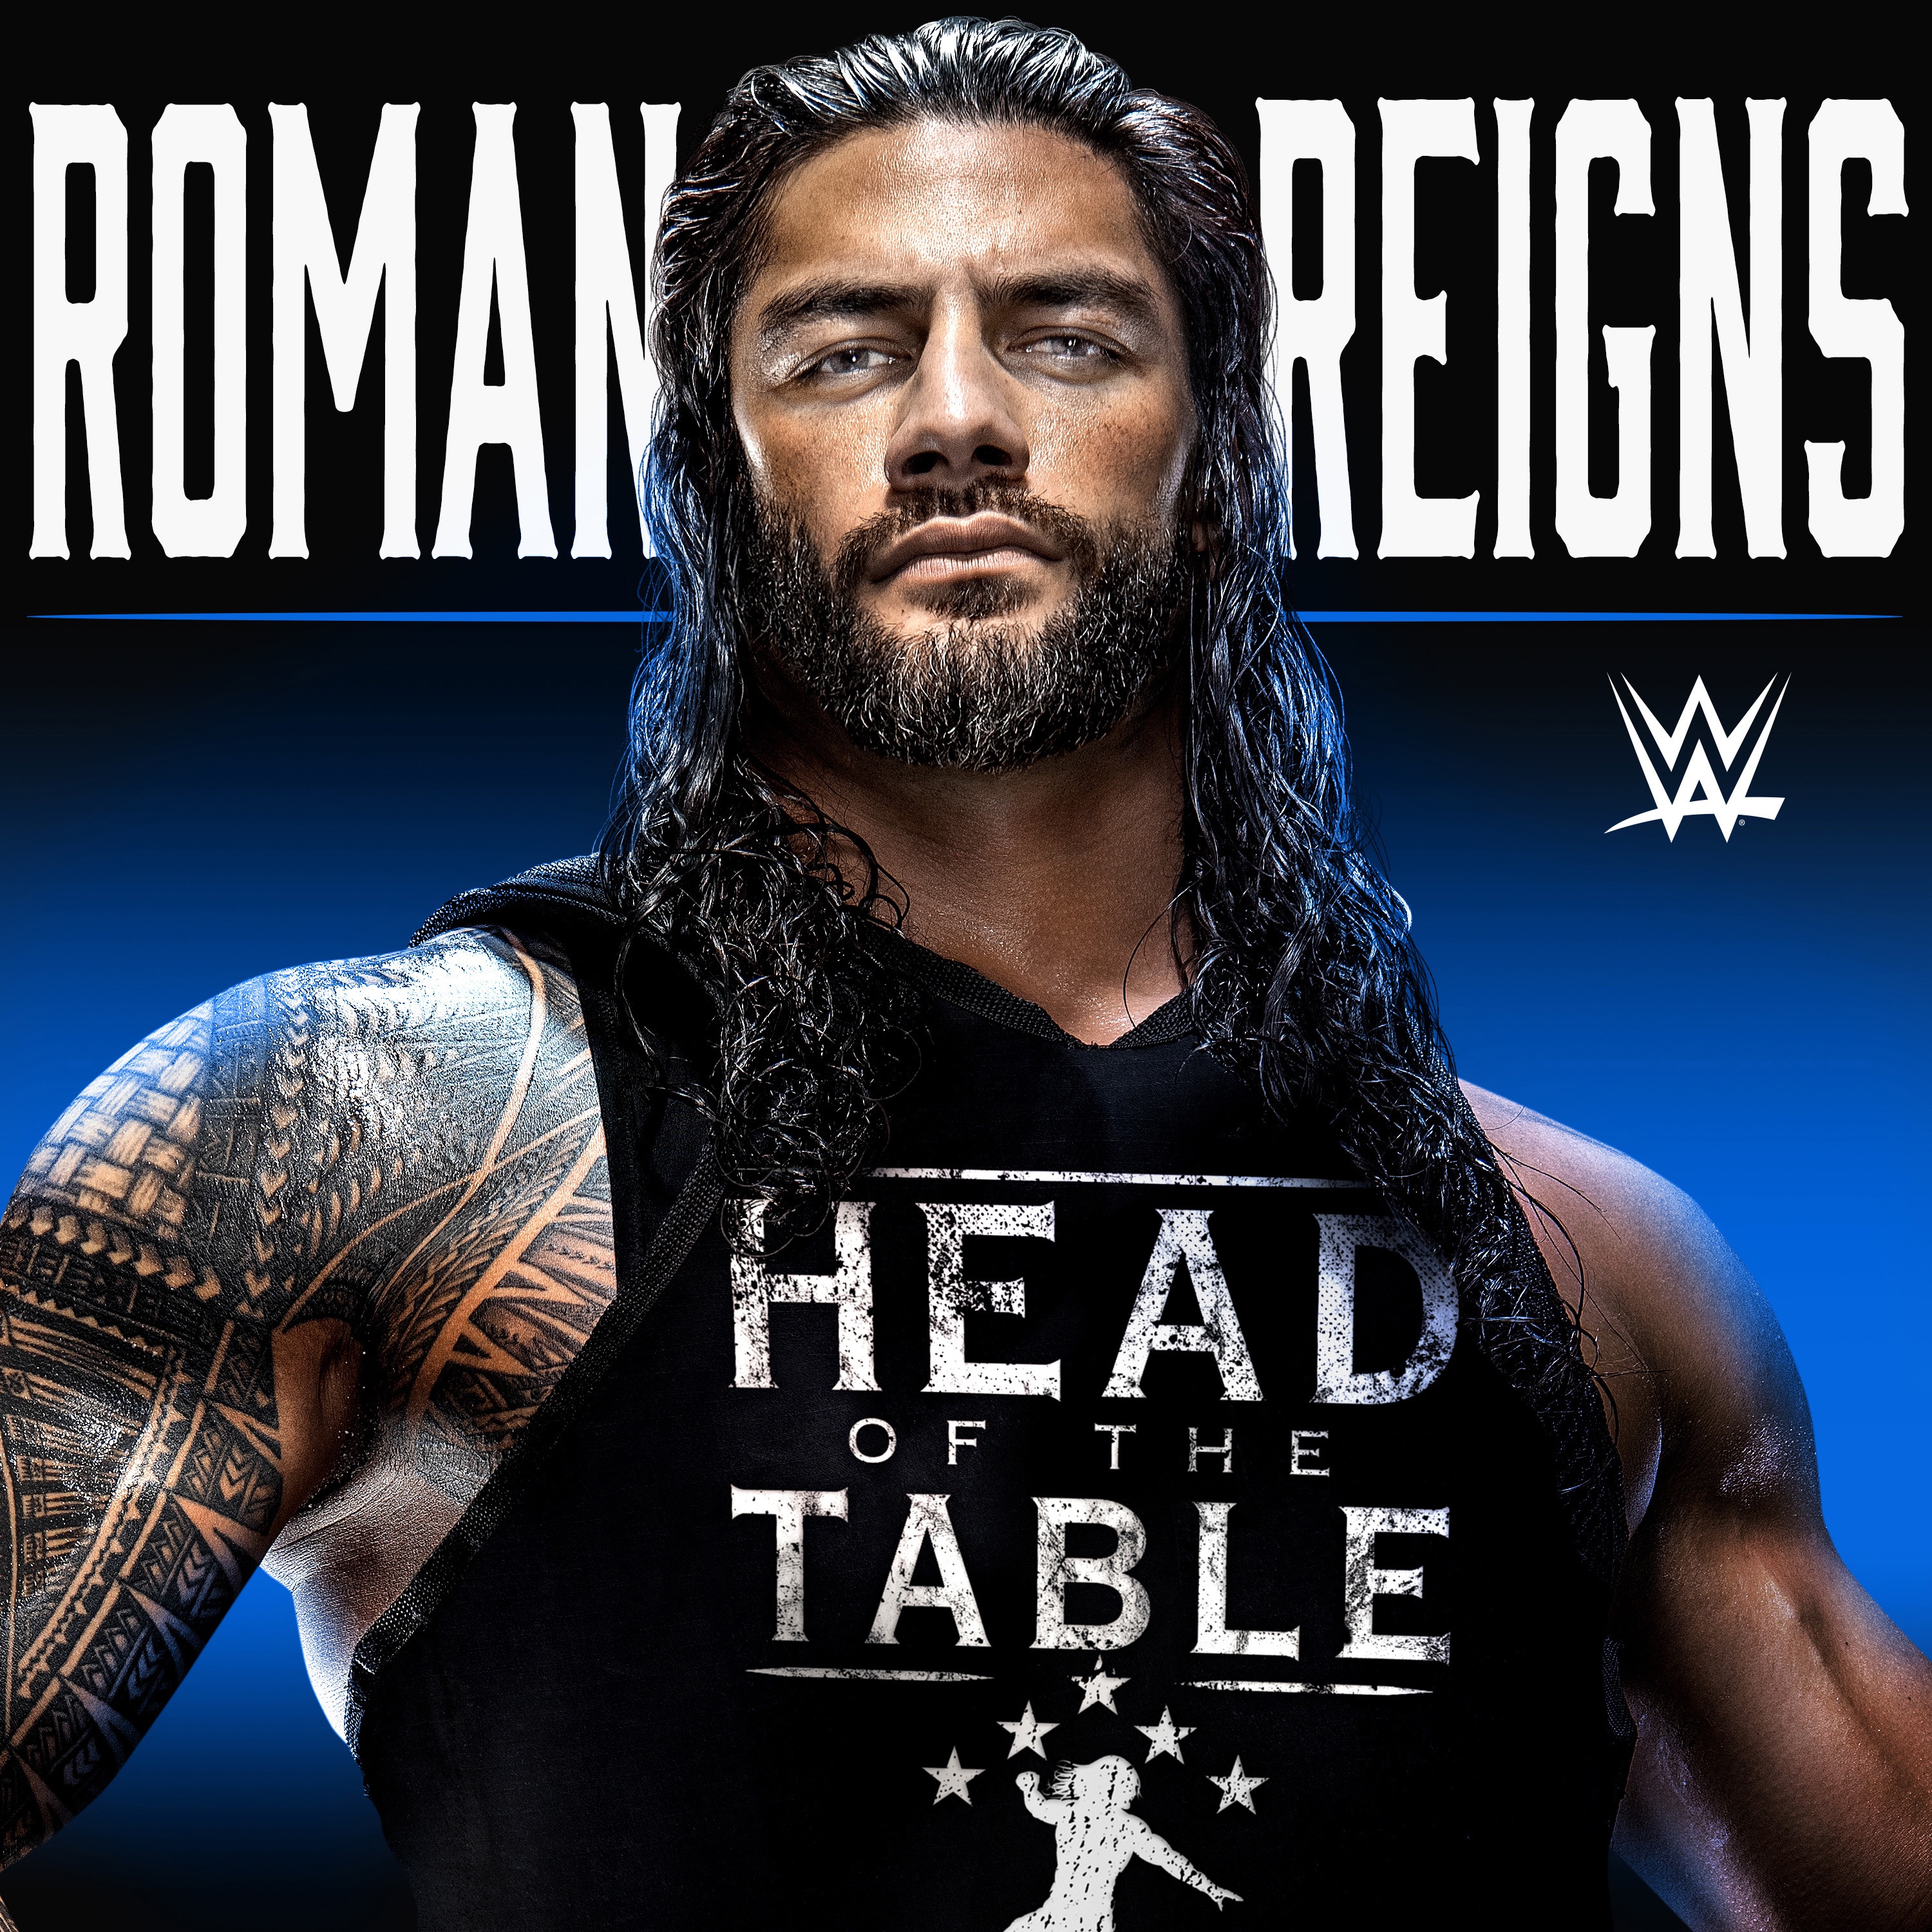 Download HD The Shield Images Roman Reigns Wallpaper And Background  Wwe  Roman Reigns Dress Transparent PNG Image  NicePNGcom